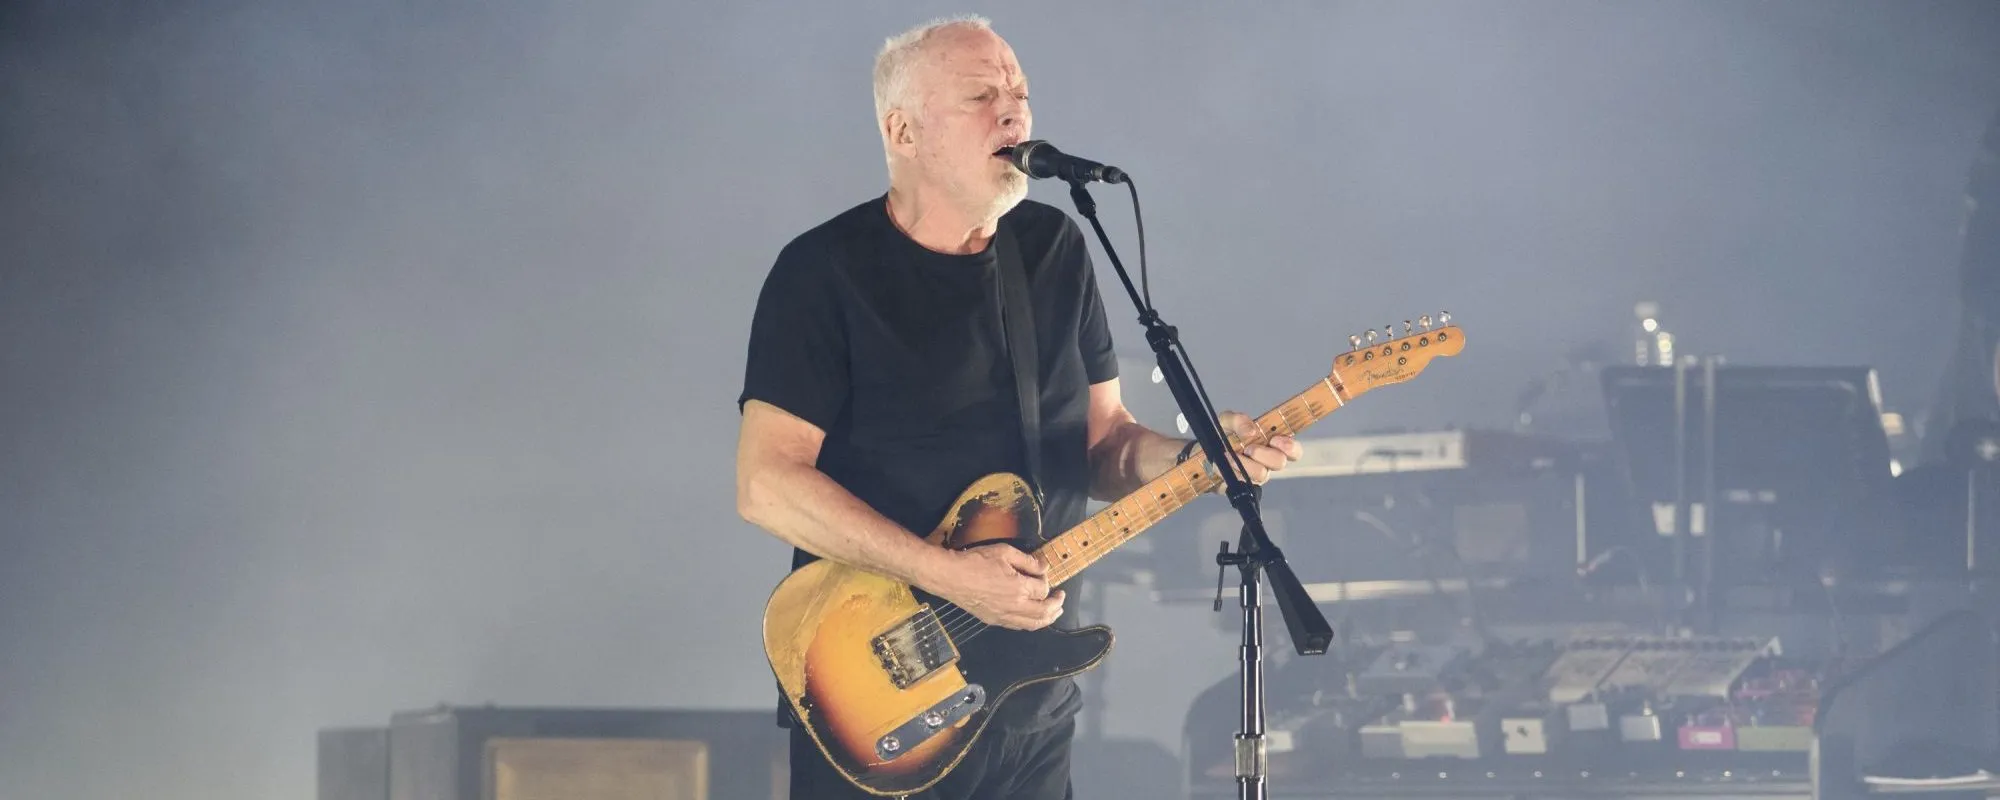 The Pink Floyd Song David Gilmour Struggled to Sing